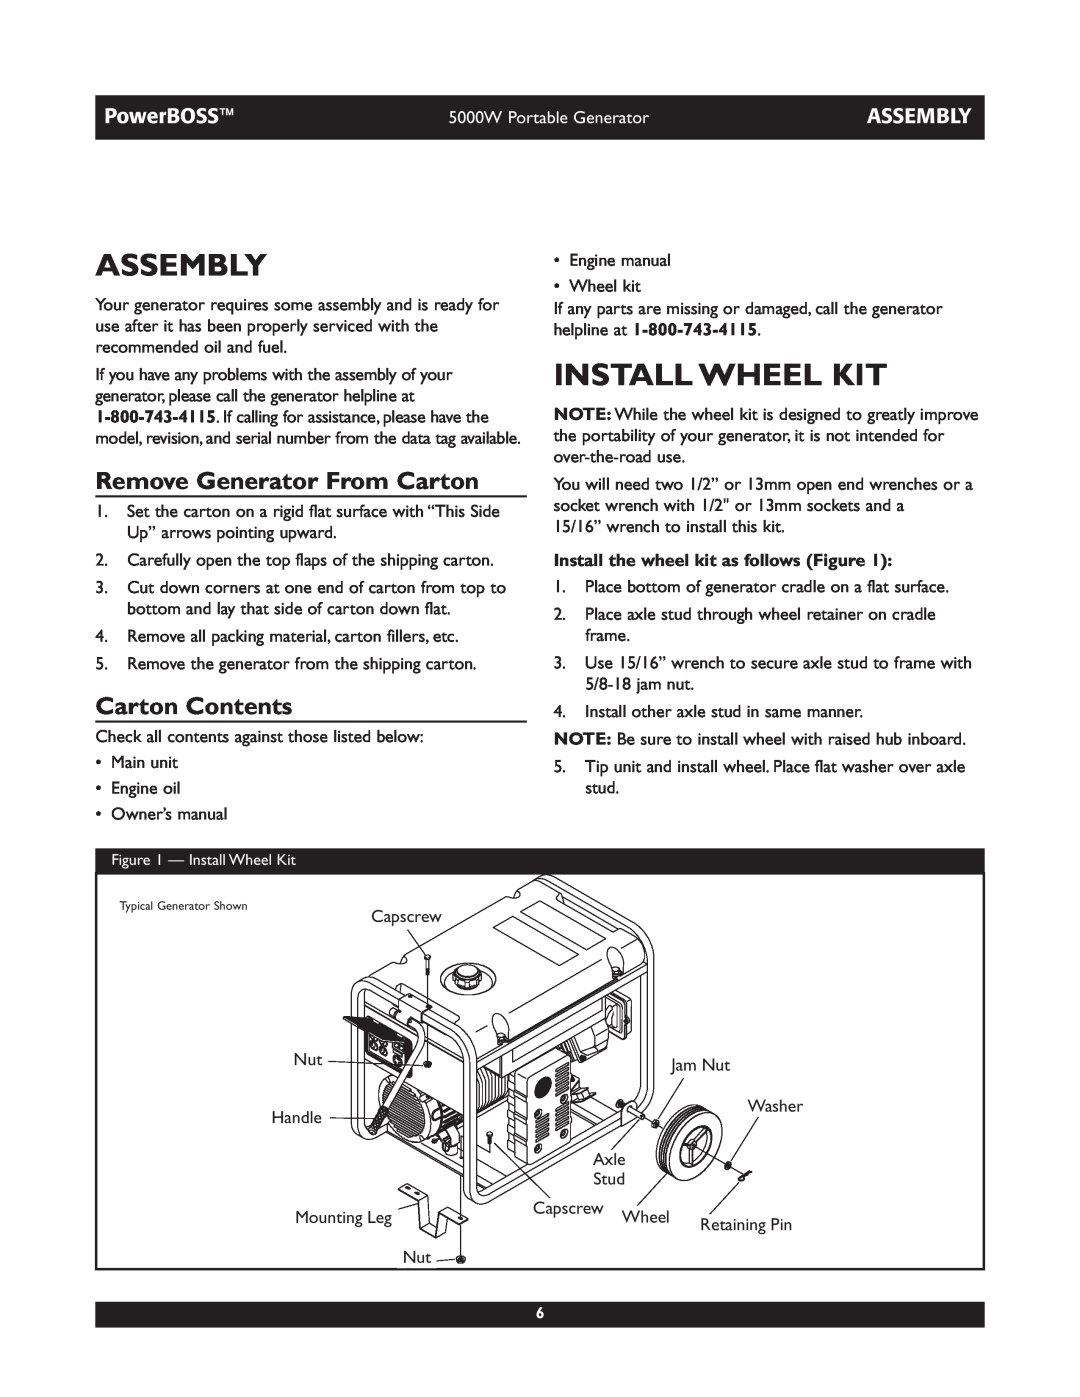 Briggs & Stratton 030222 owner manual Assembly, Install Wheel Kit, Remove Generator From Carton, Carton Contents, PowerBOSS 